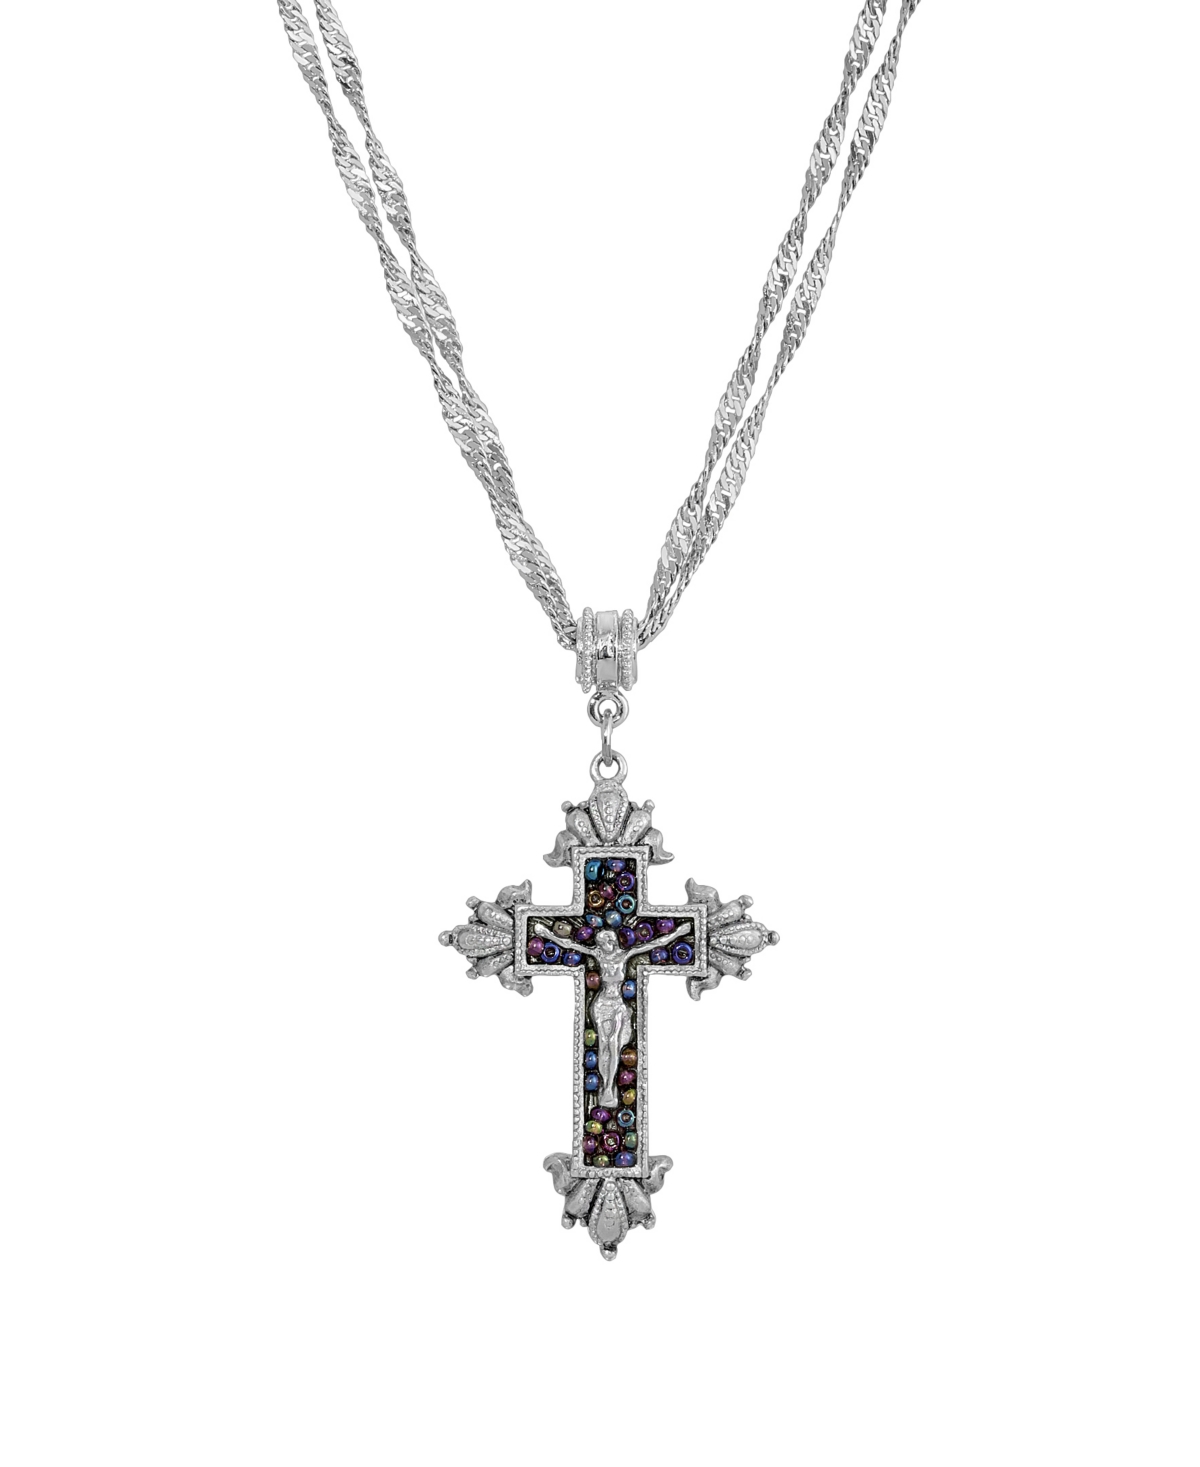 Pewter Crucifix with Purple Seeded Beads Necklace - Purple